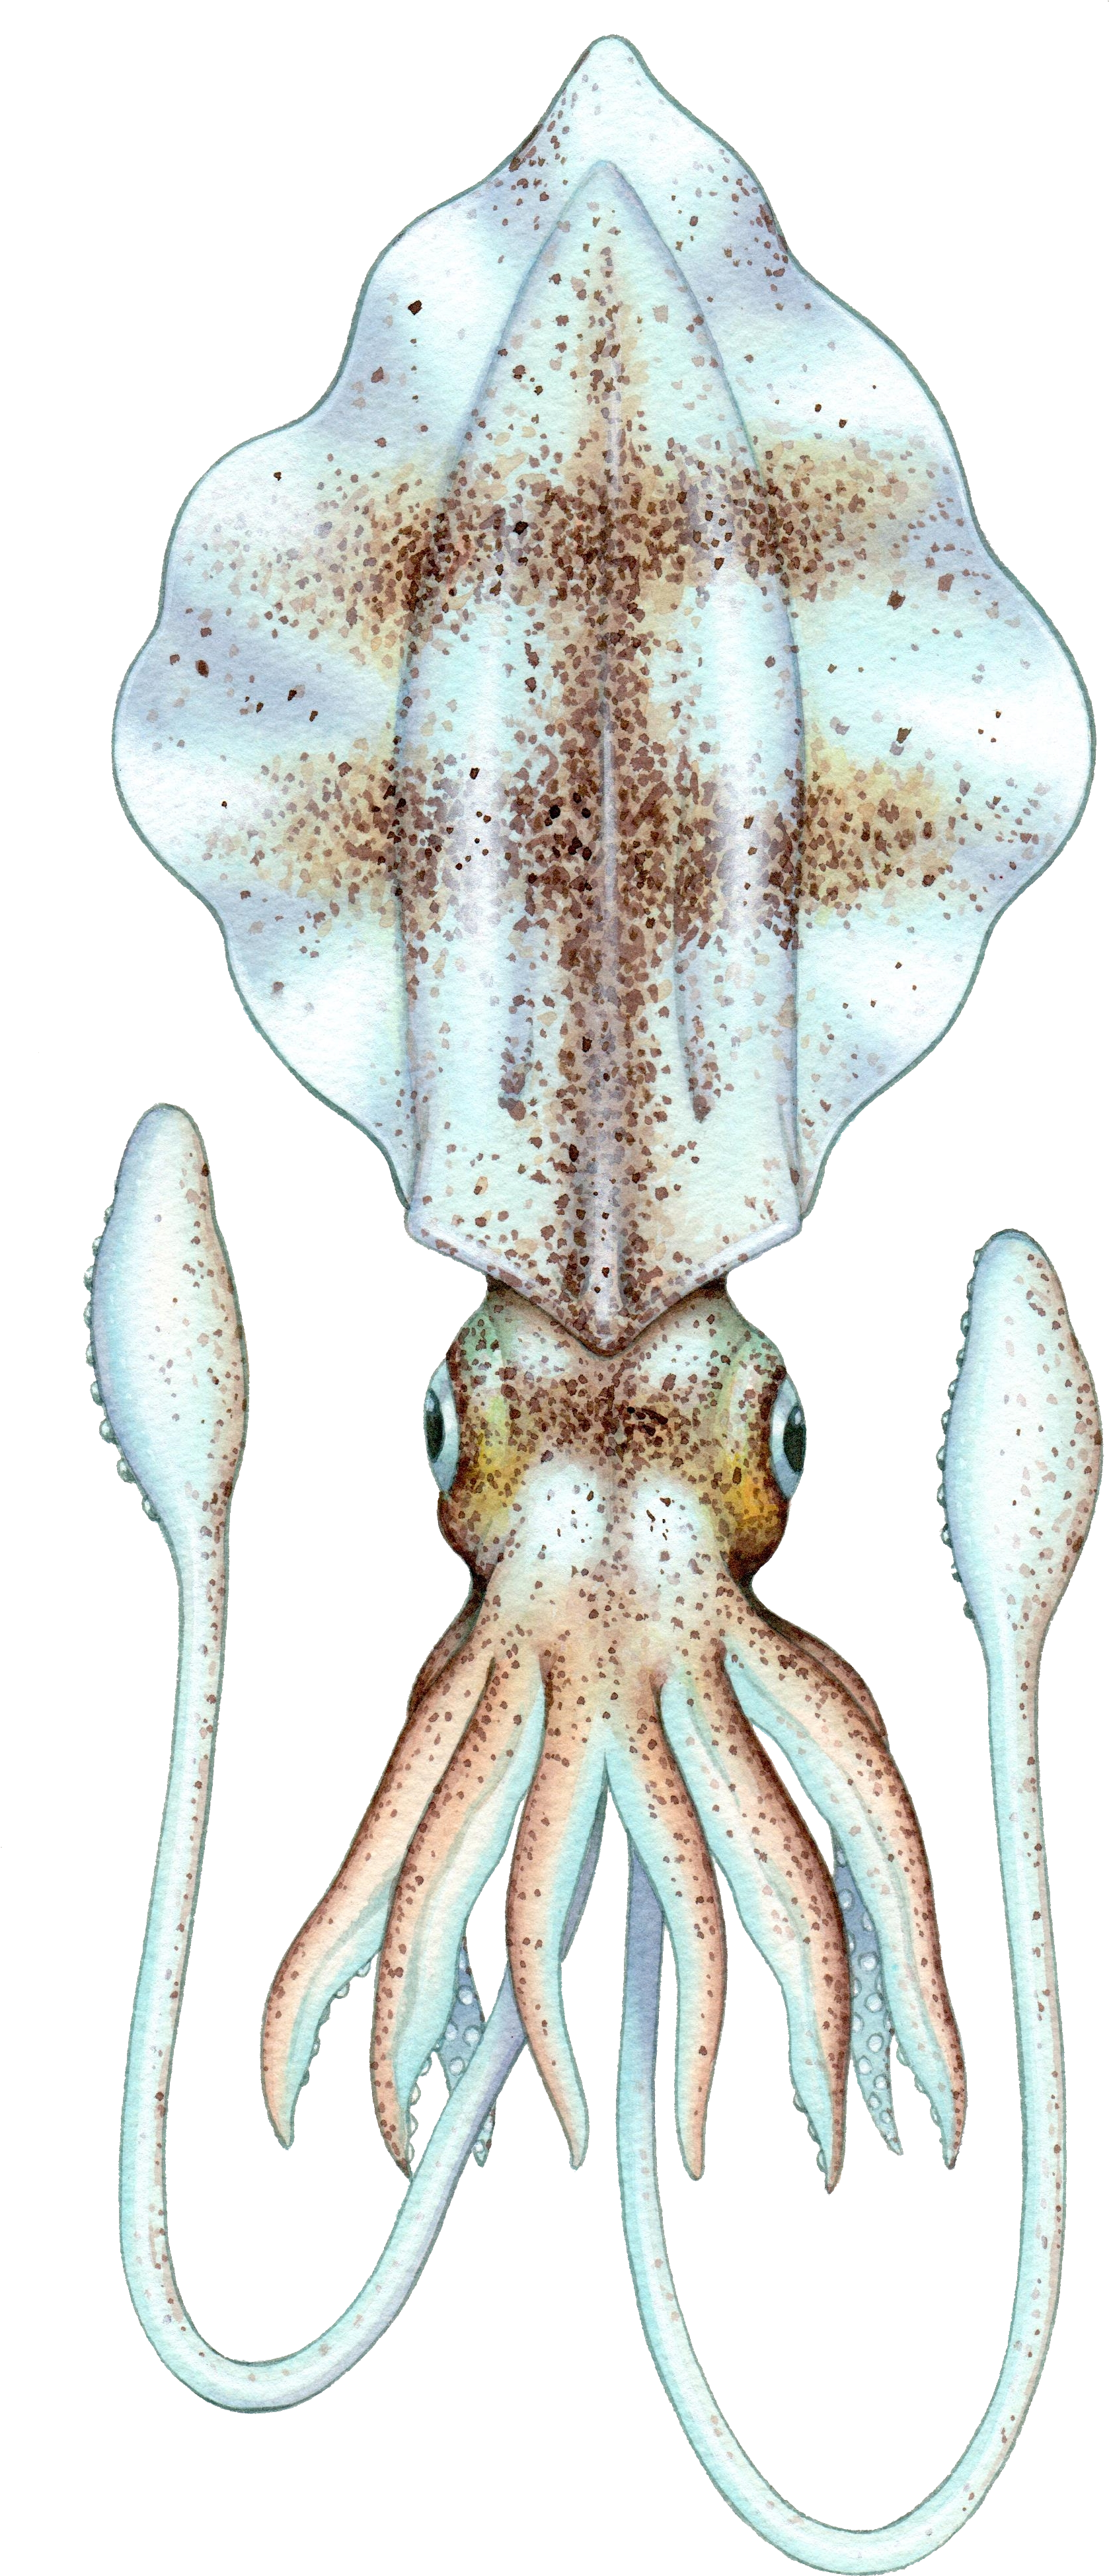 A Close Up Of A Squid